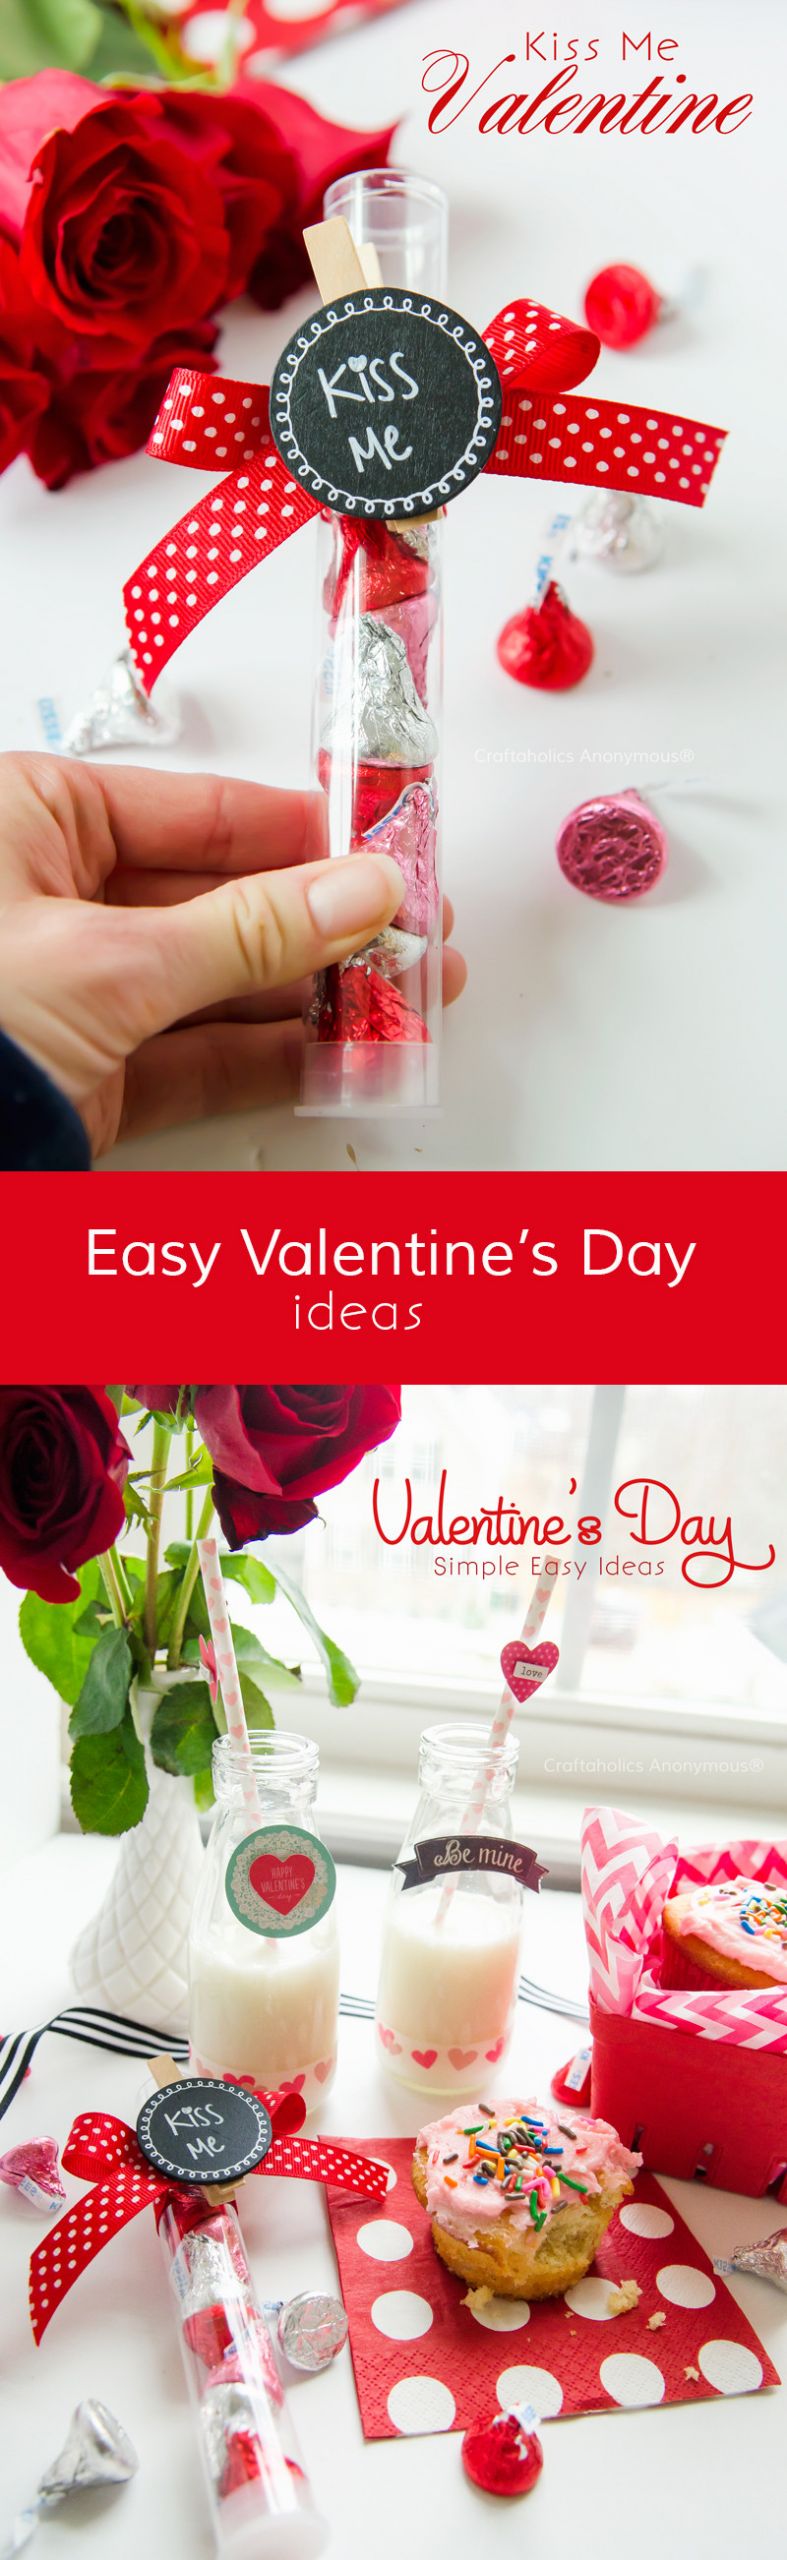 Cheap Valentines Day Dates Ideas
 Craftaholics Anonymous